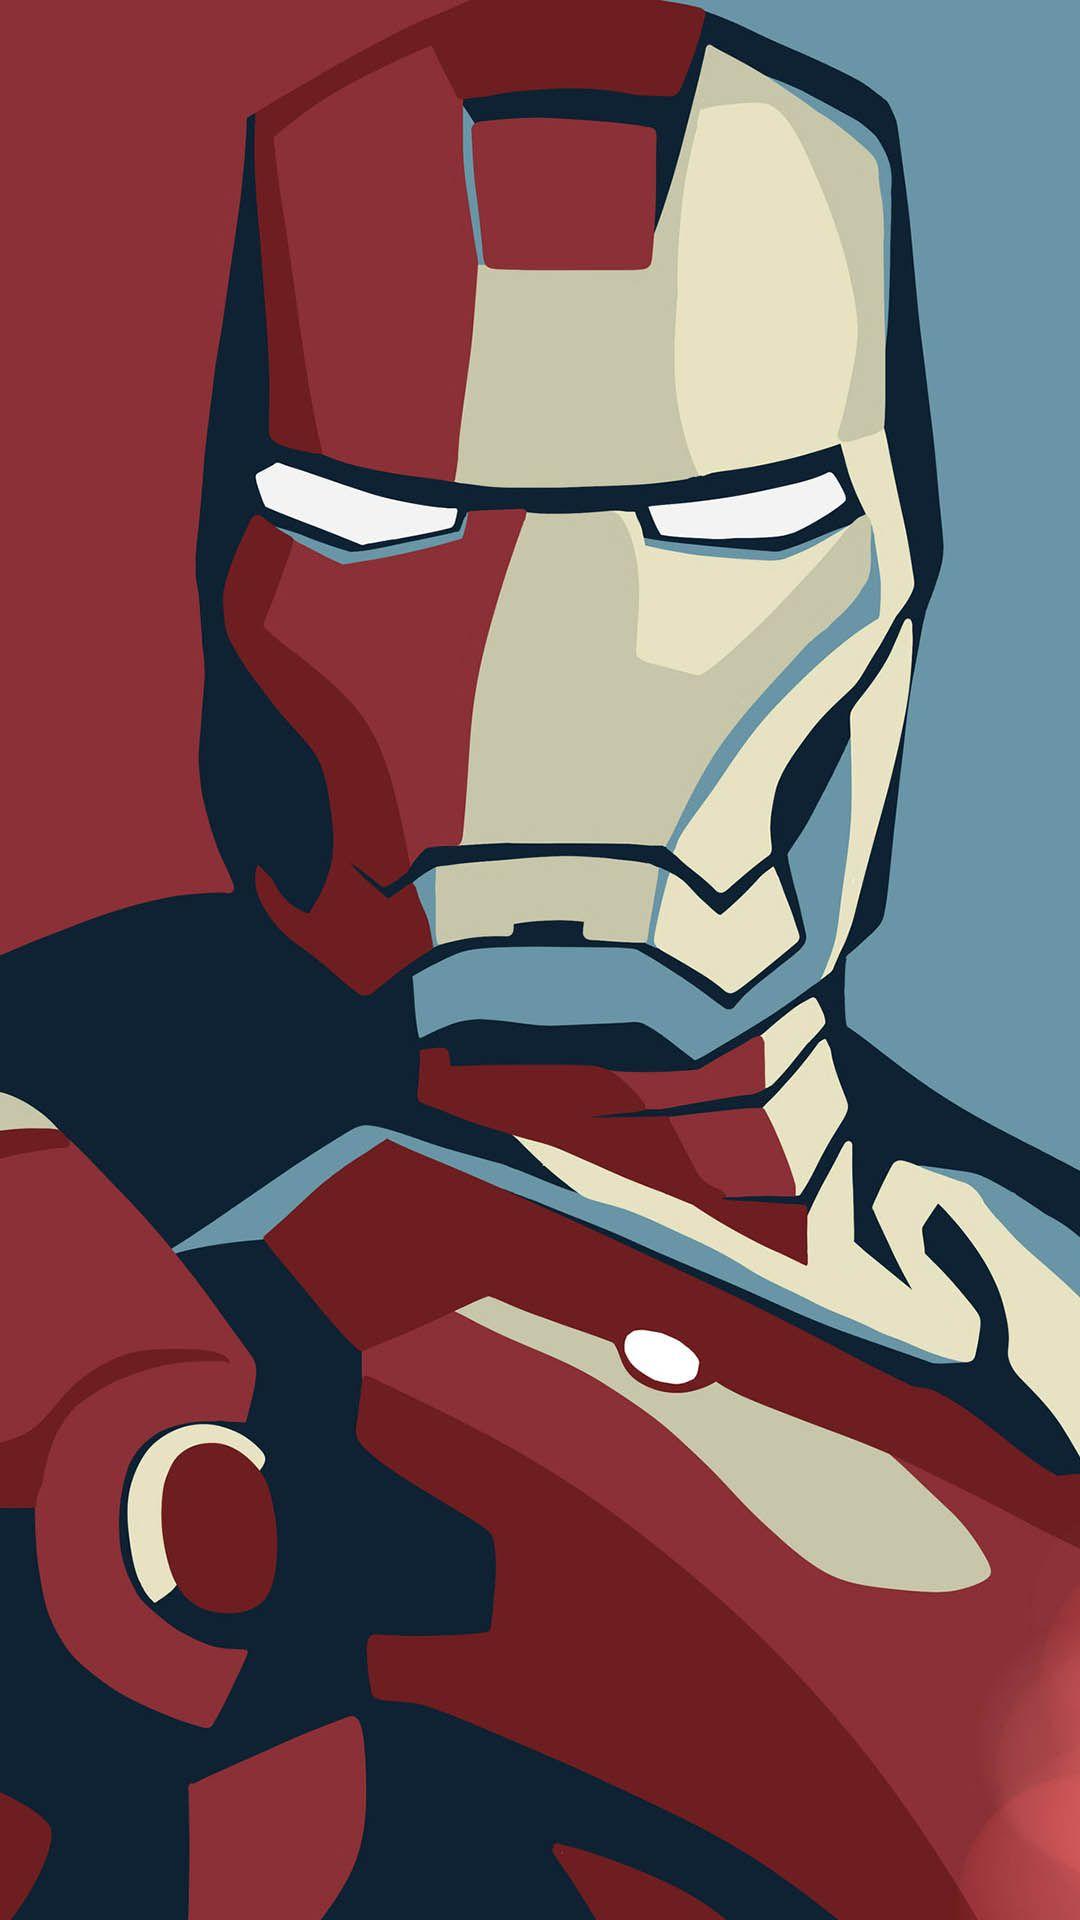 Black Iron Man Hd Wallpapers For Mobile